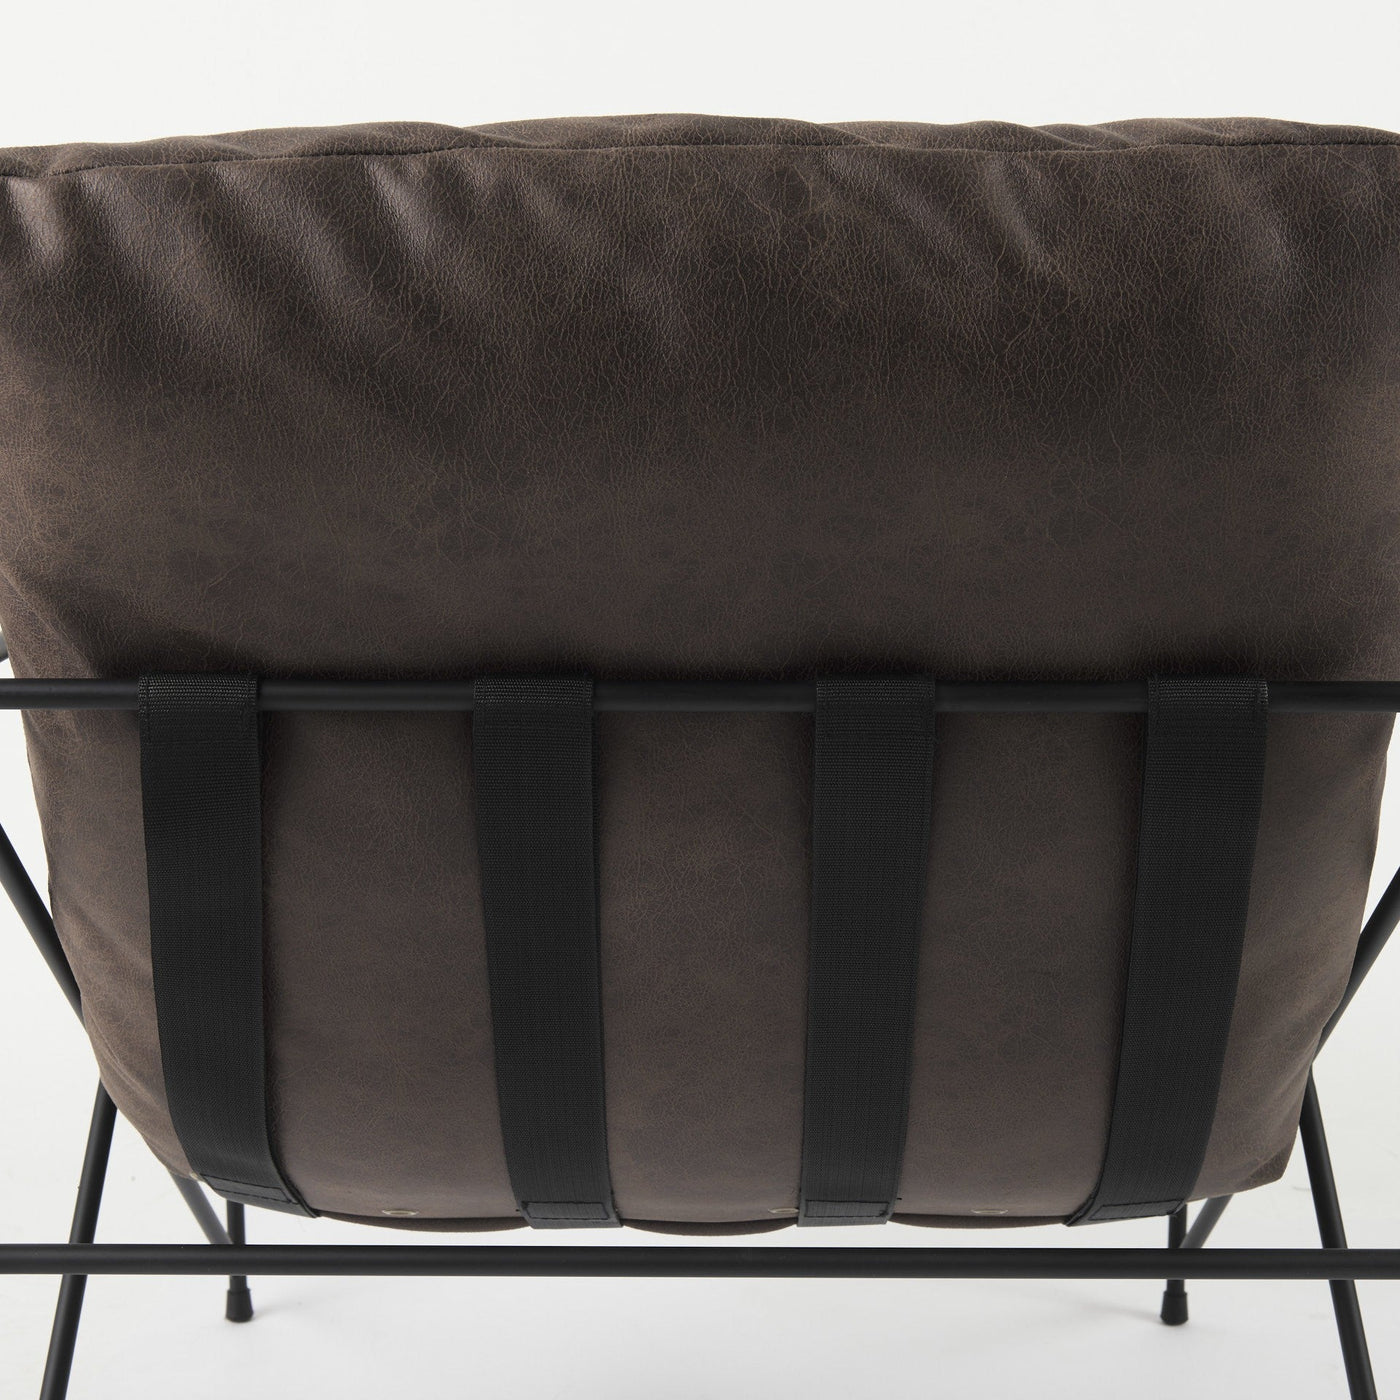 Dark Brown Faux Leather Contemporary Metal Chair - Accent Chairs